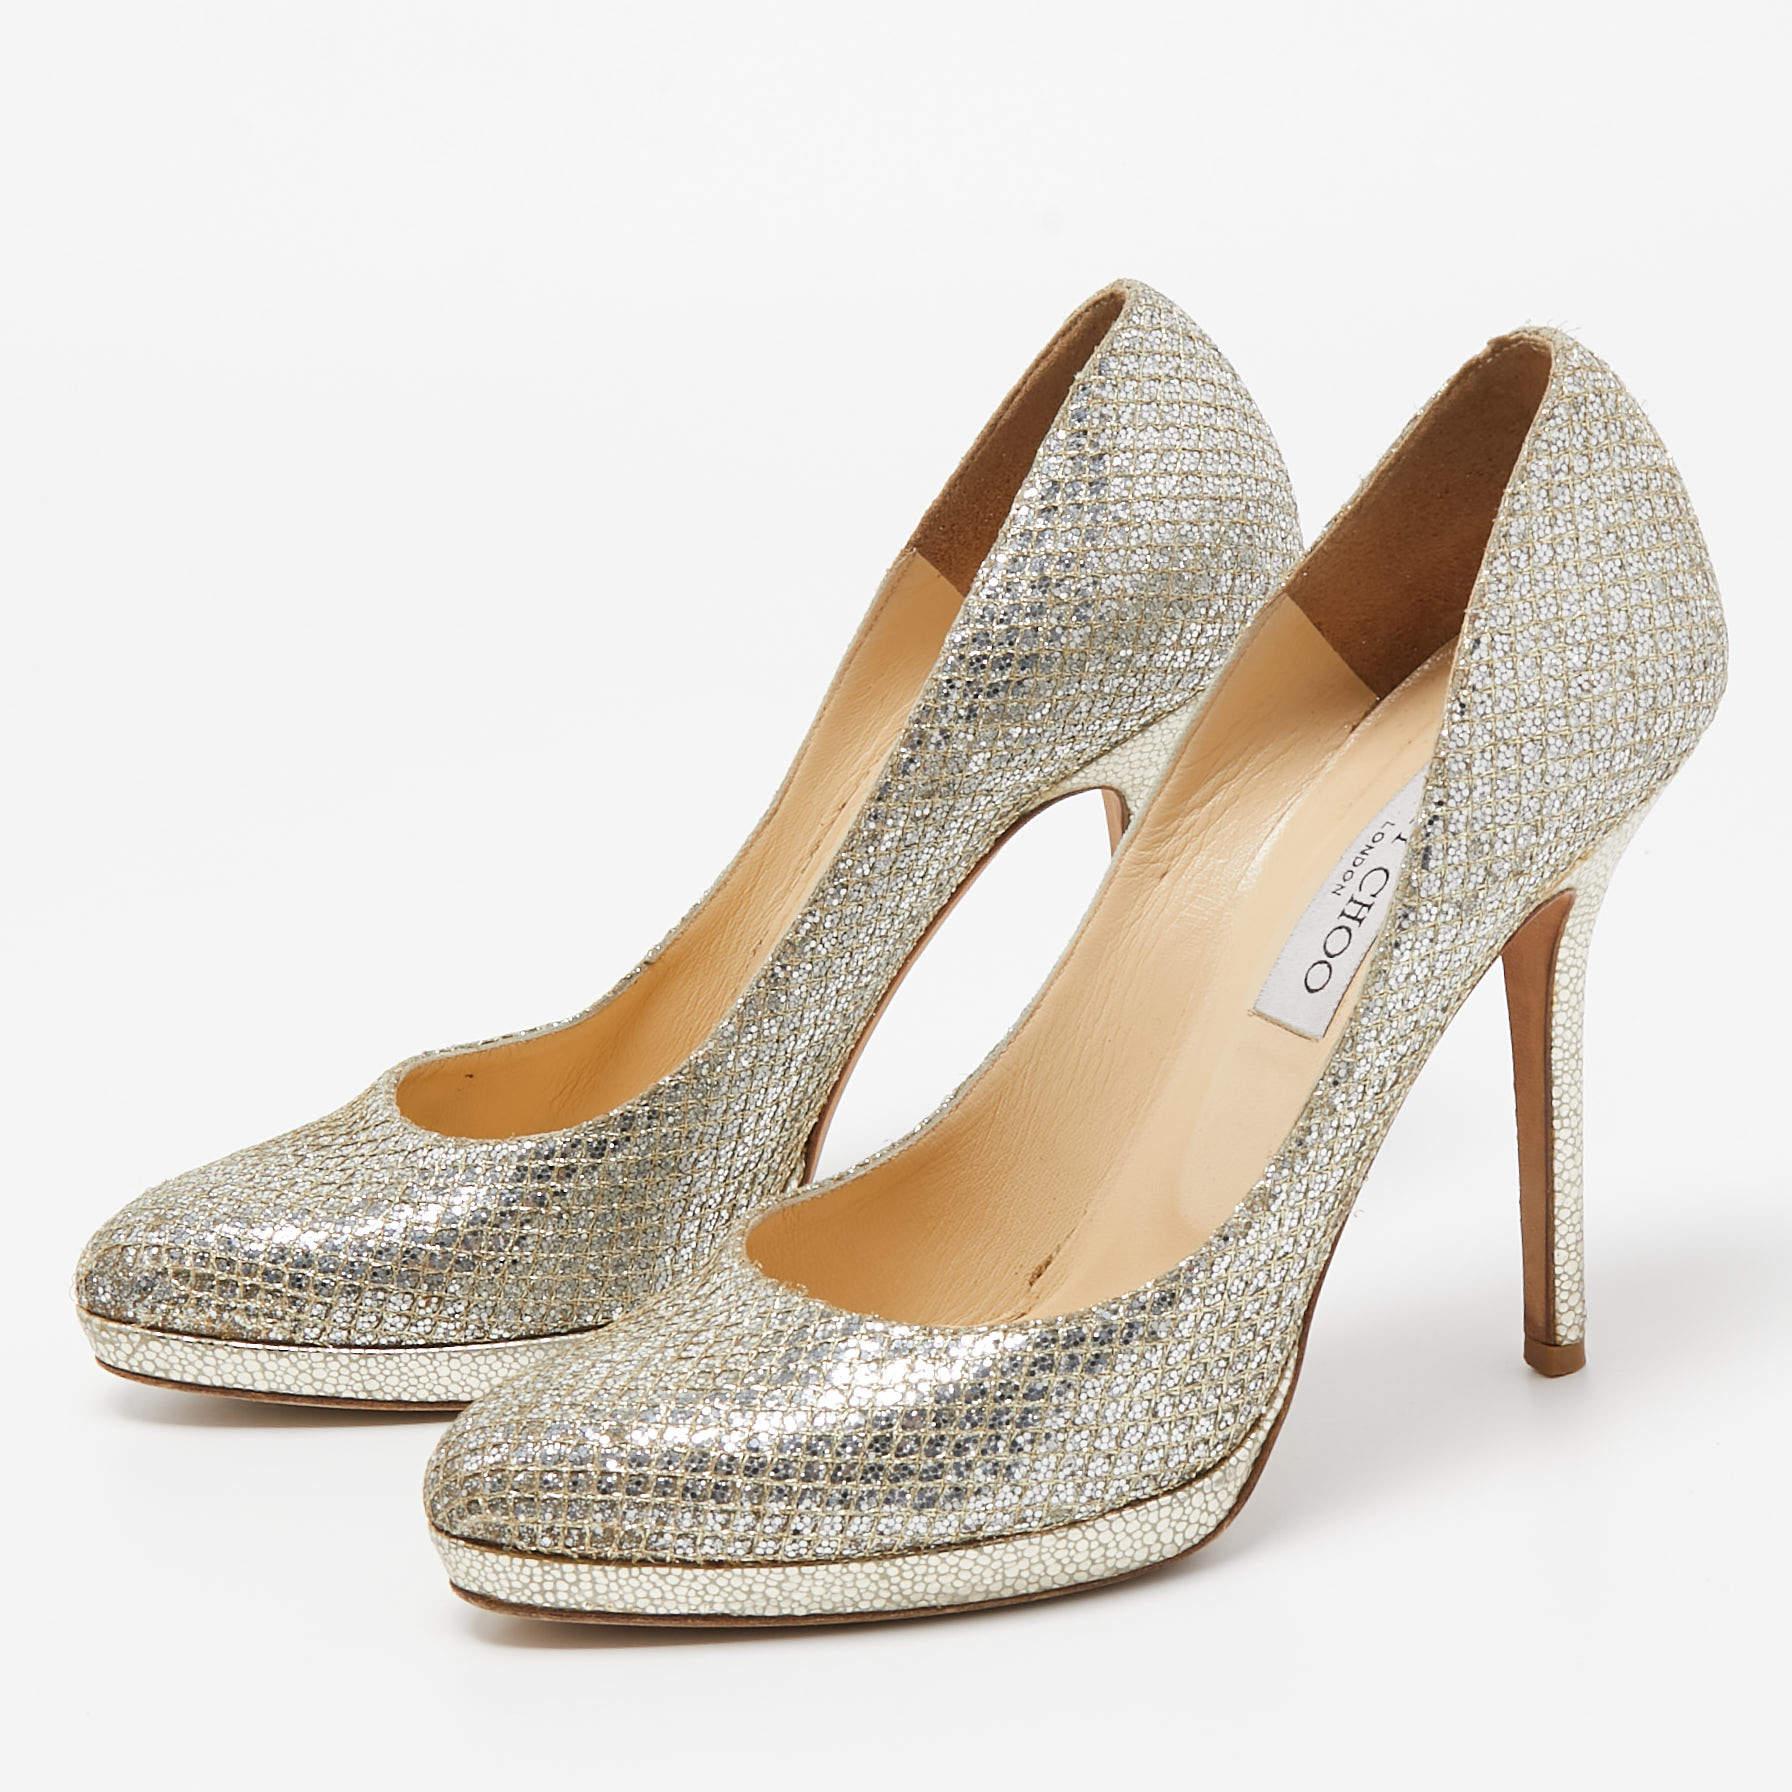 Complement your well-put-together outfit with these authentic Jimmy Choo glitter pumps. Timeless and classy, they have an amazing construction for enduring quality and comfortable fit.

